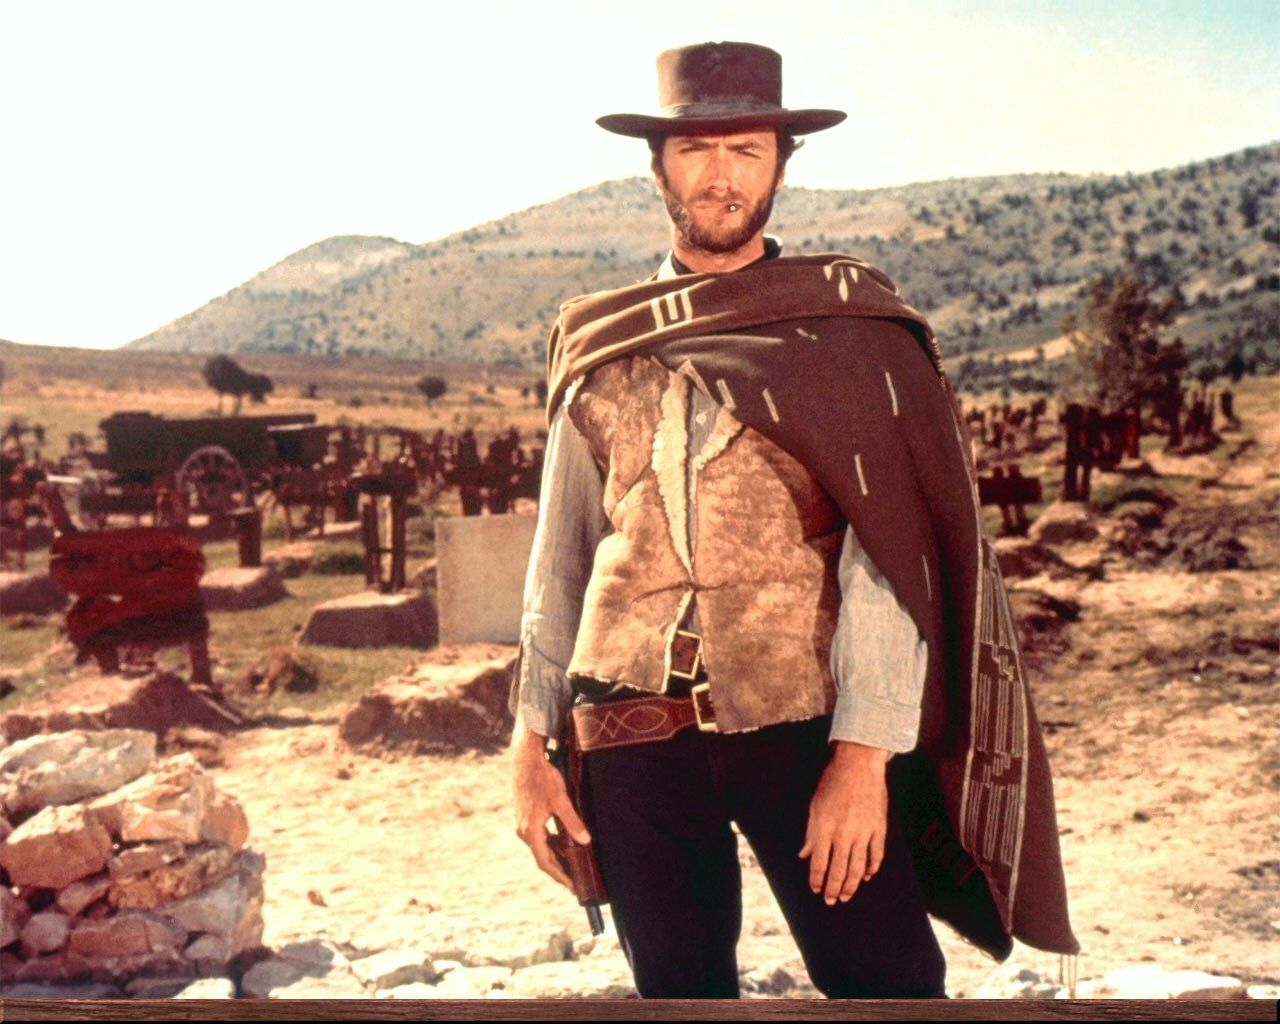 Clint Eastwood in A Fistful of Dollars. Clint eastwood, Western